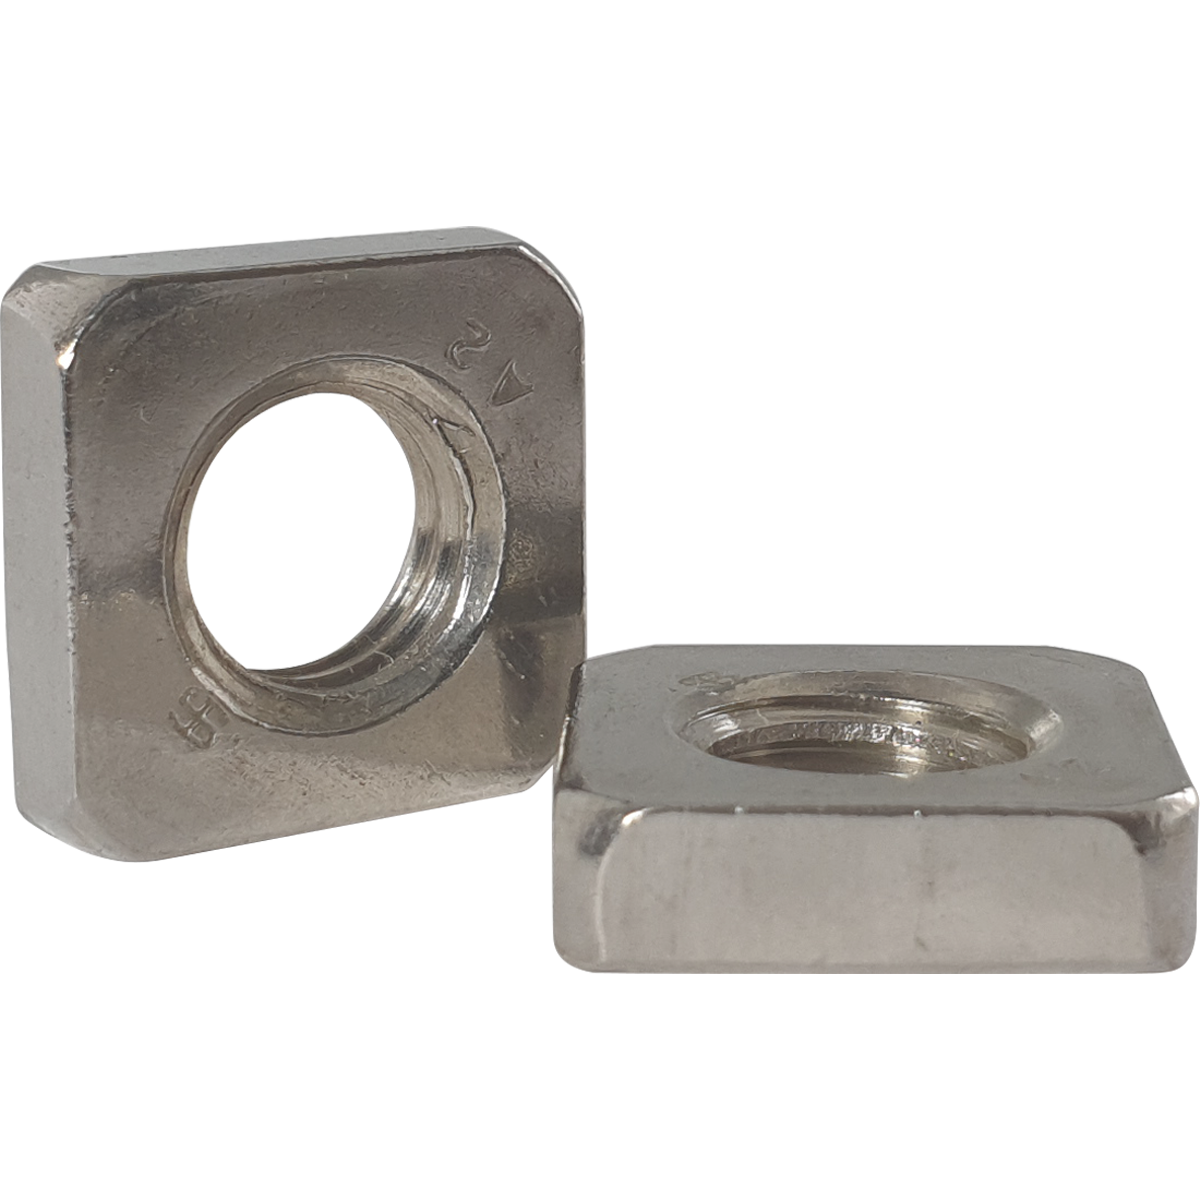 A2 stainless steel, metric, square nuts, also known as square head nuts all available at competitive prices.